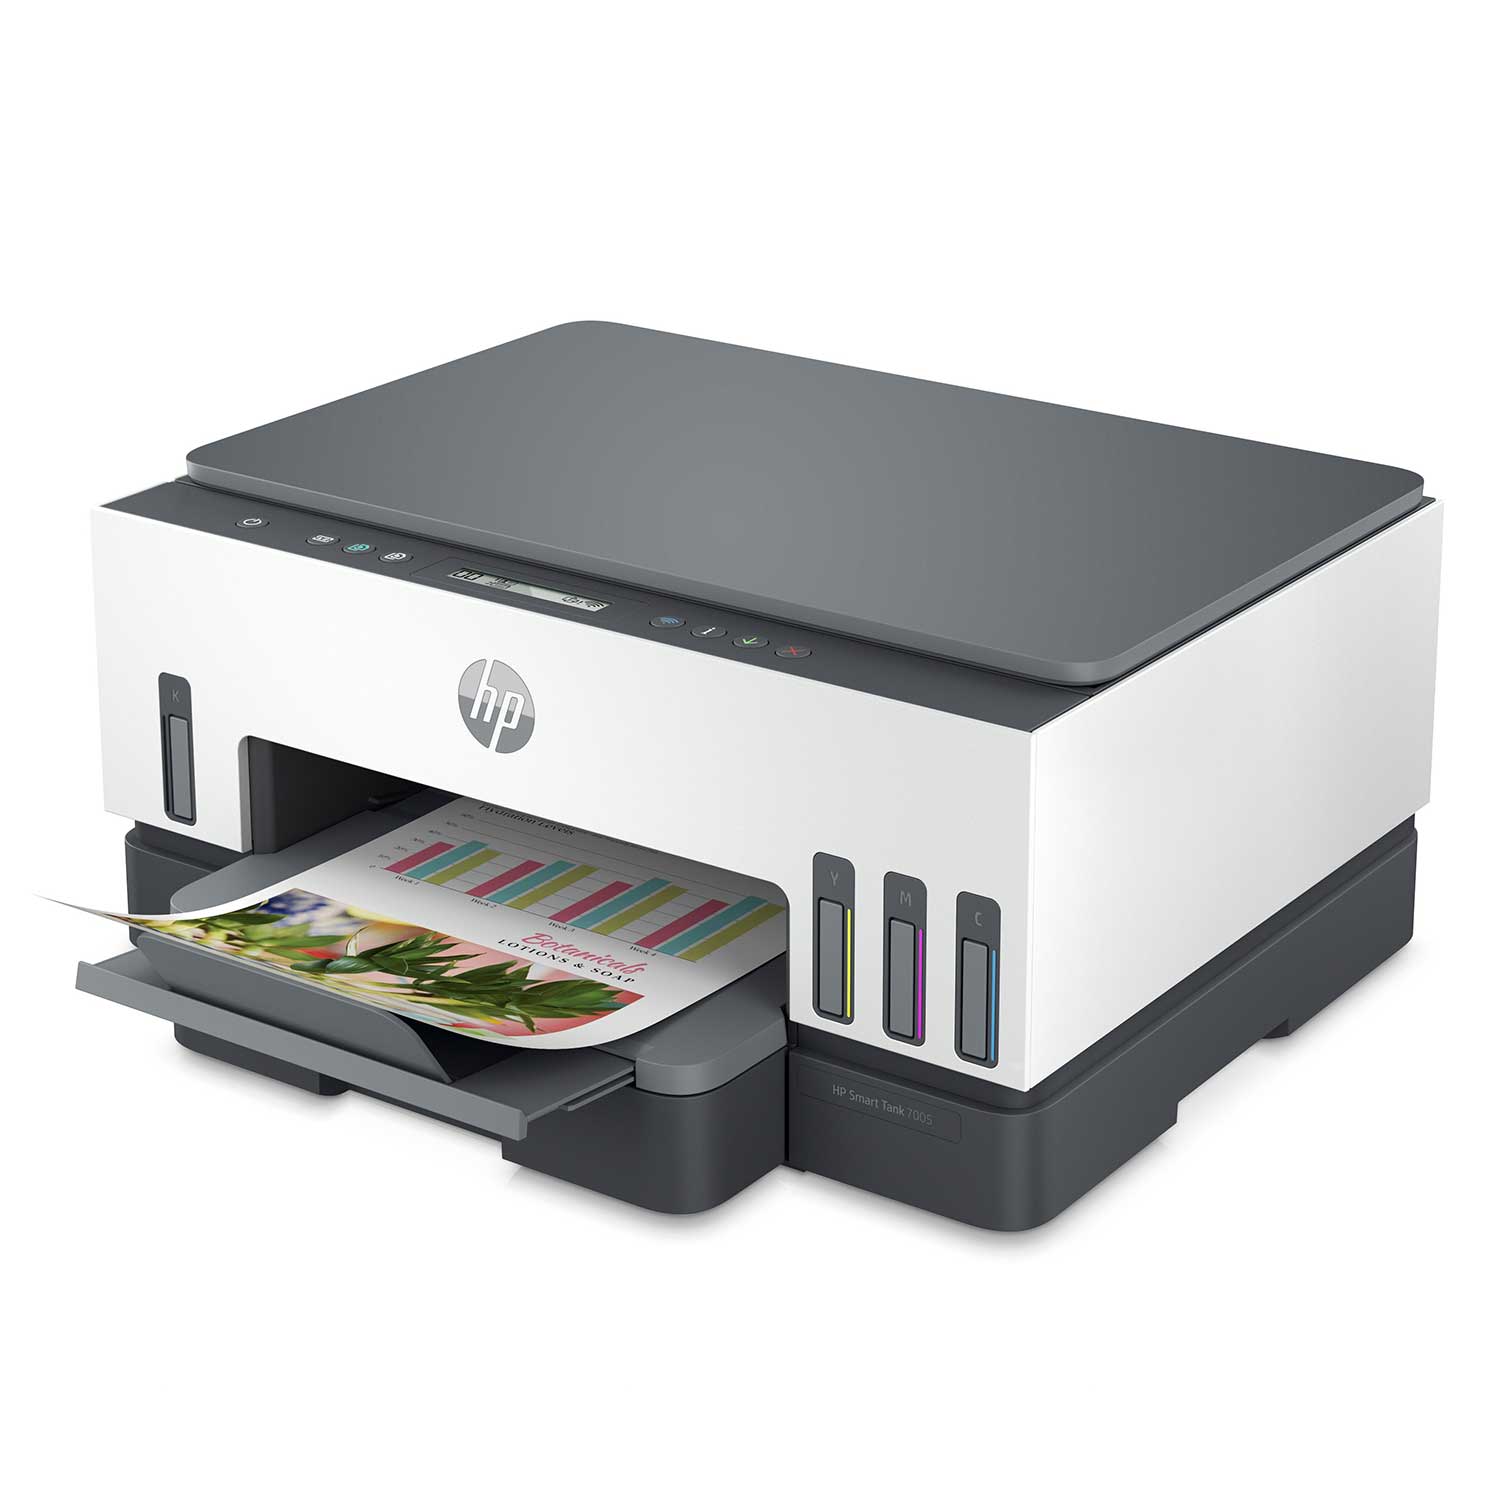 HP Smart Tank 7005 All In One pas cher - HardWare.fr